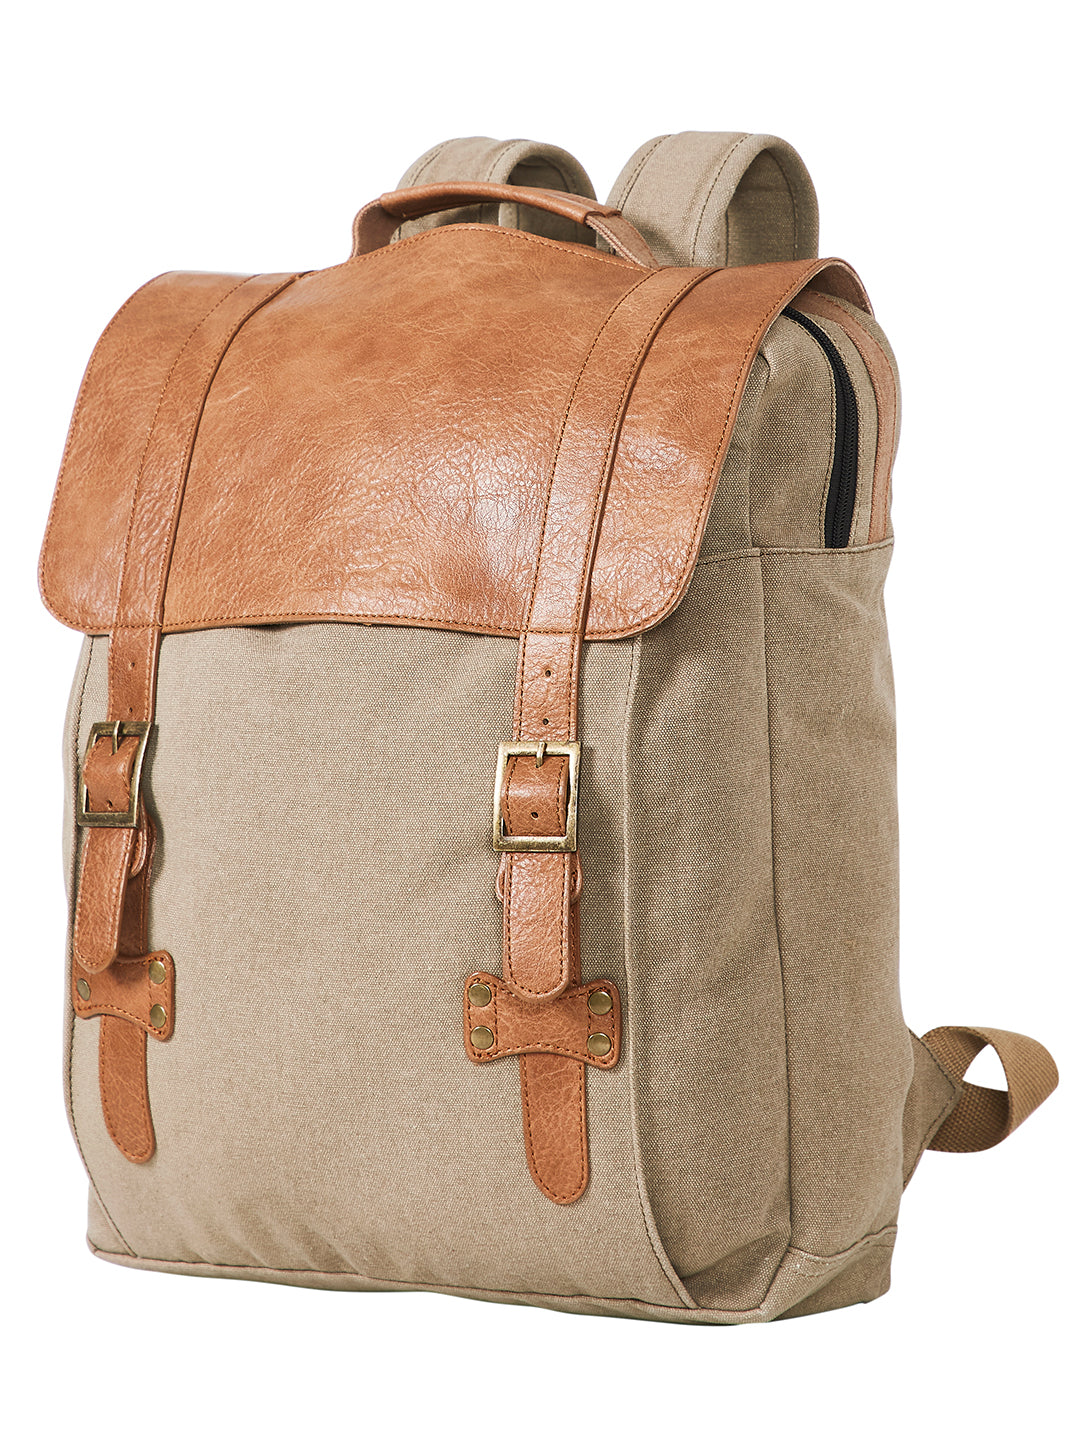 Mona B - Brown 100% cotton canvas back pack for offices schools and colleges with 14" laptop sleeve and stylish design